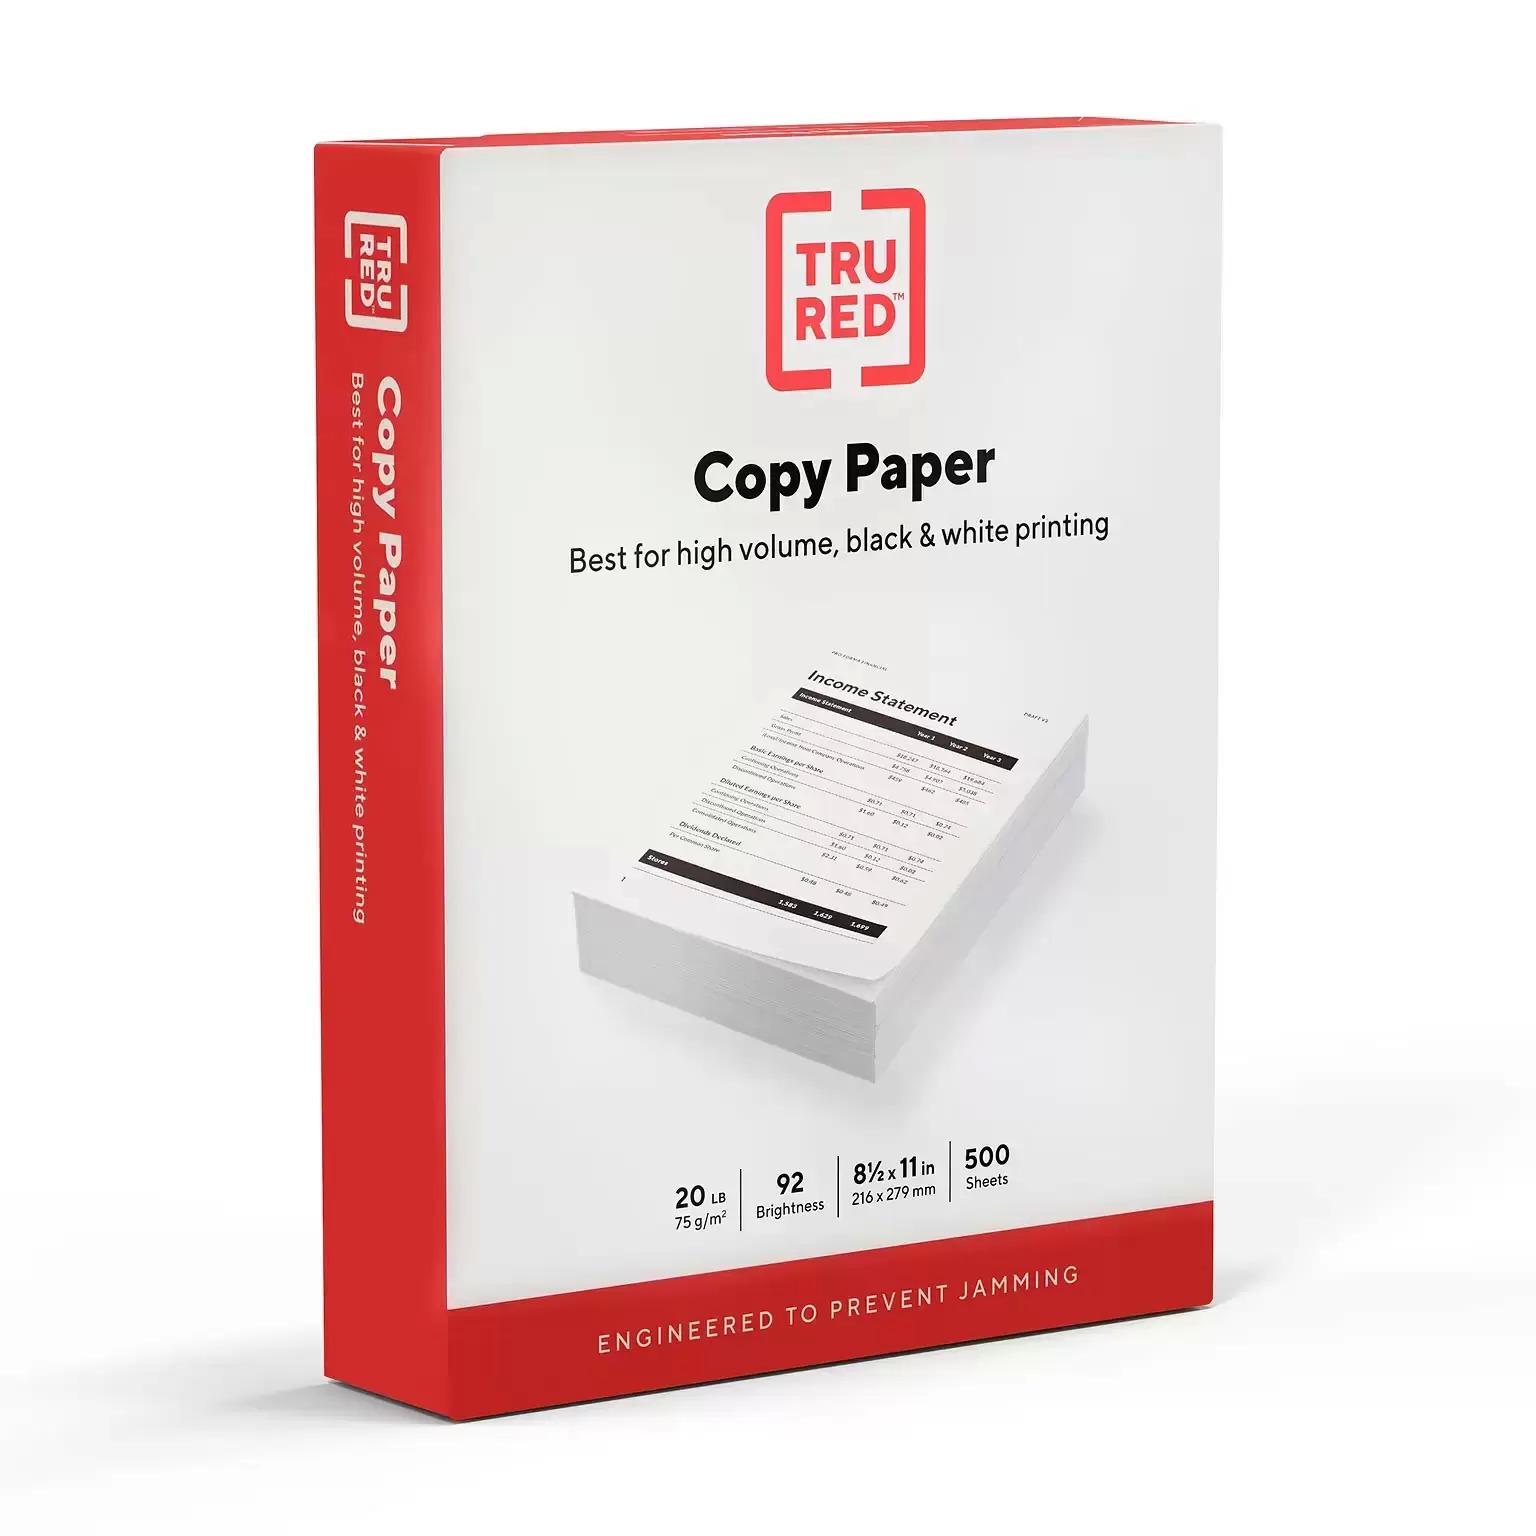 500 Sheets of TRU RED Copy Paper for $2.99 Shipped